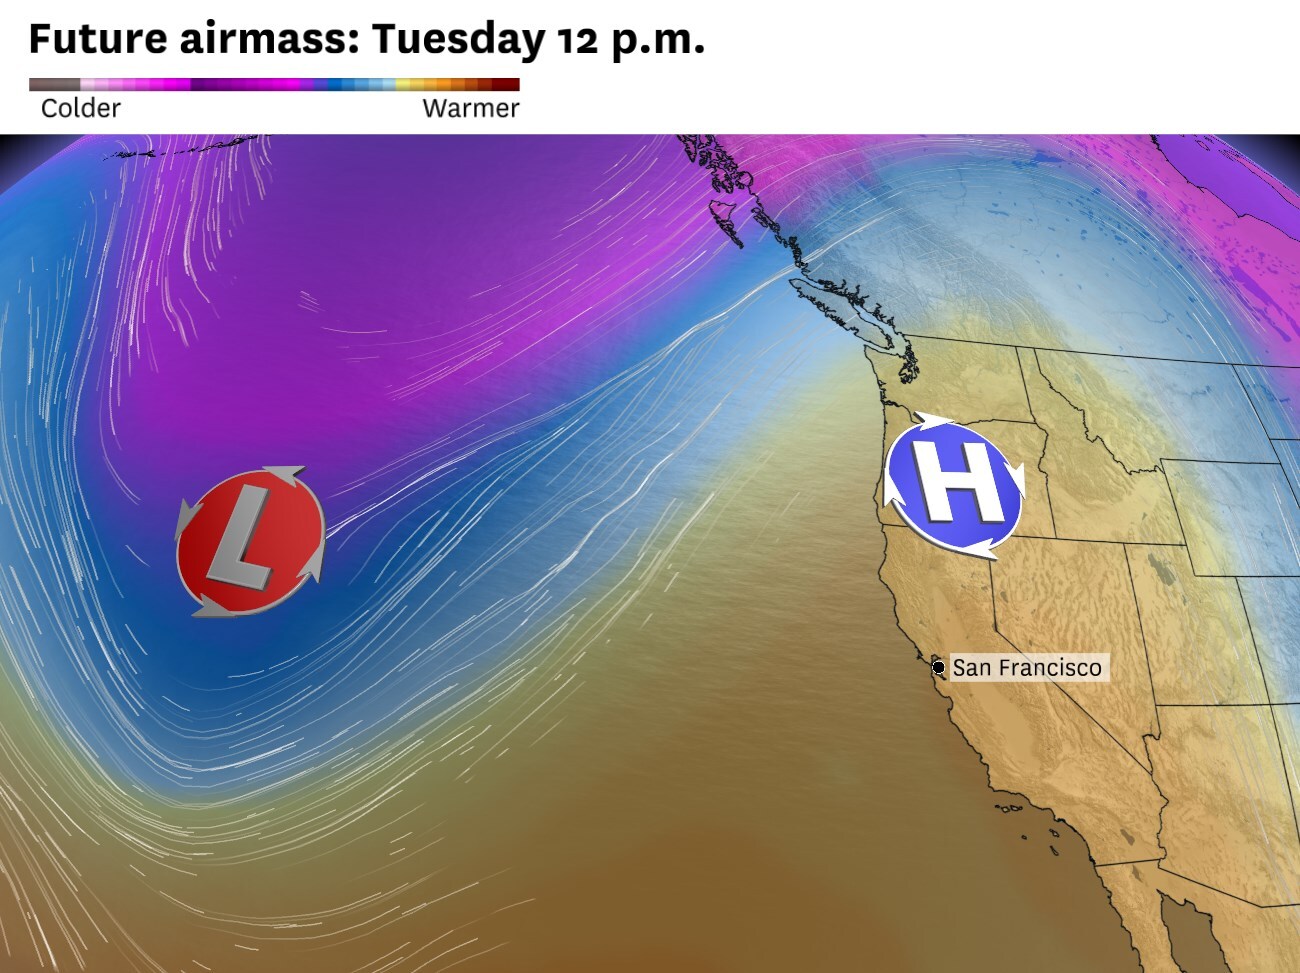 Are atmospheric river storms coming to California soon? Here’s the forecast